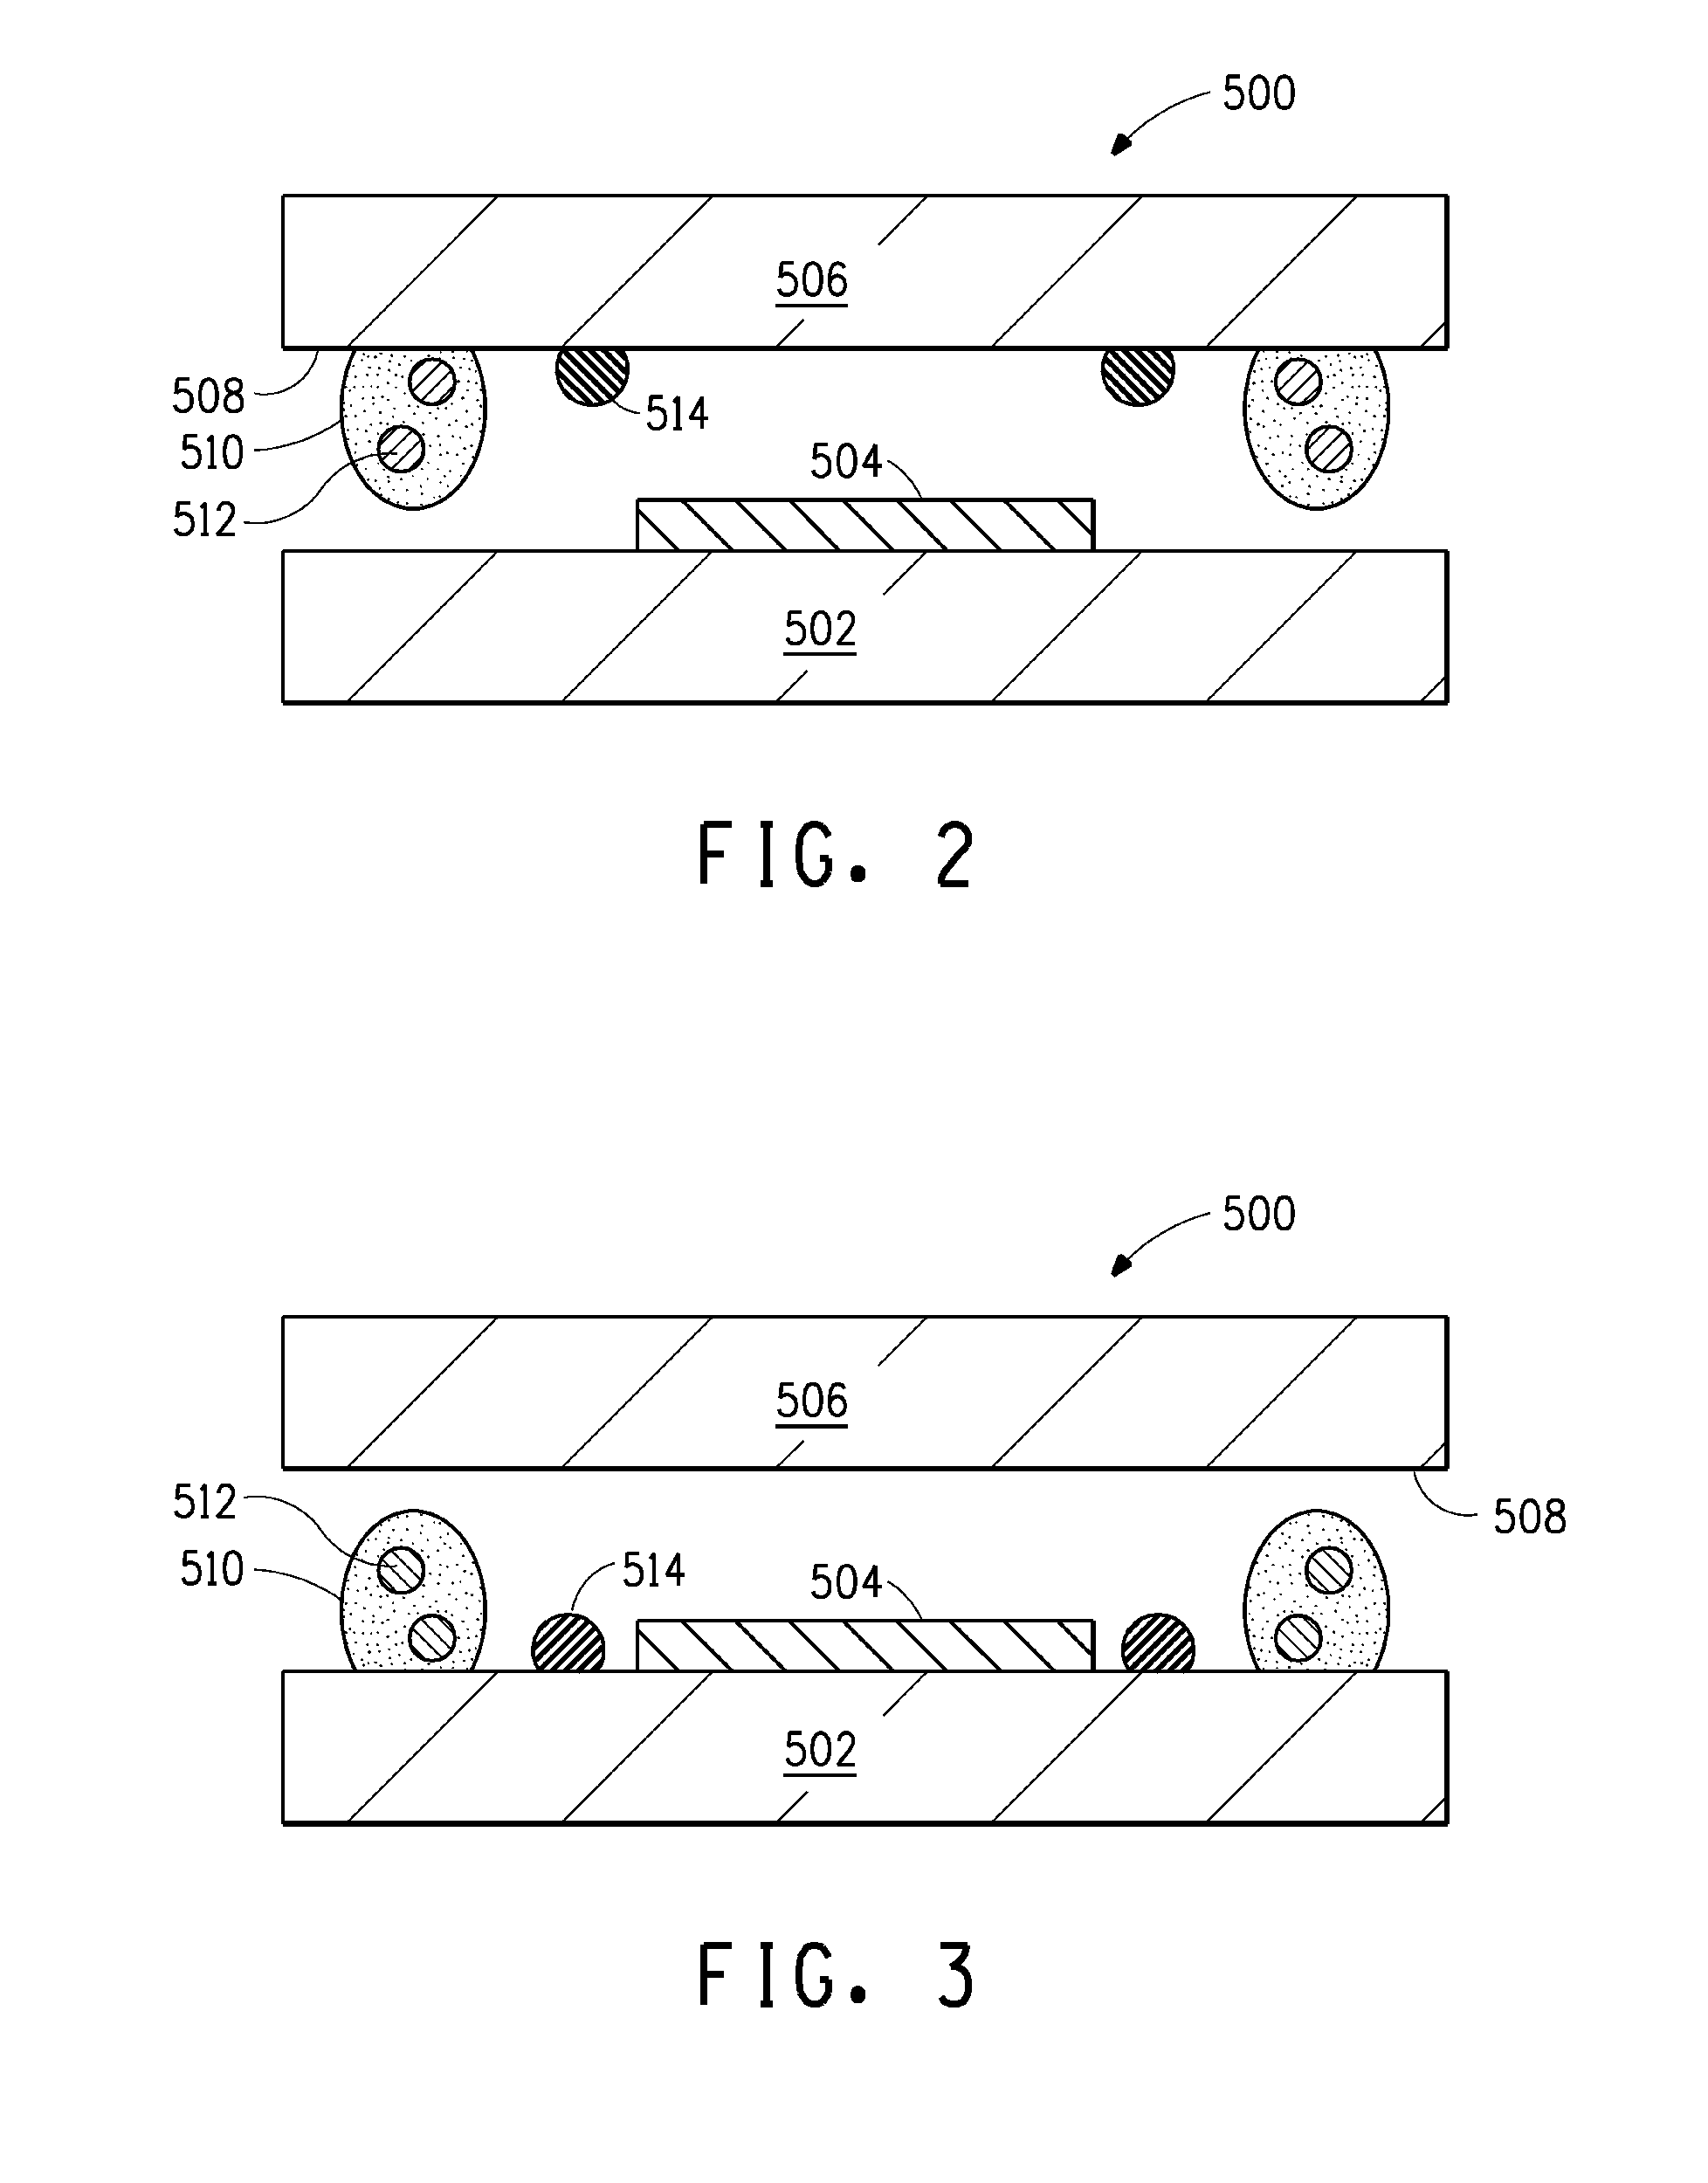 Flat plate encapsulation assembly for electronic devices